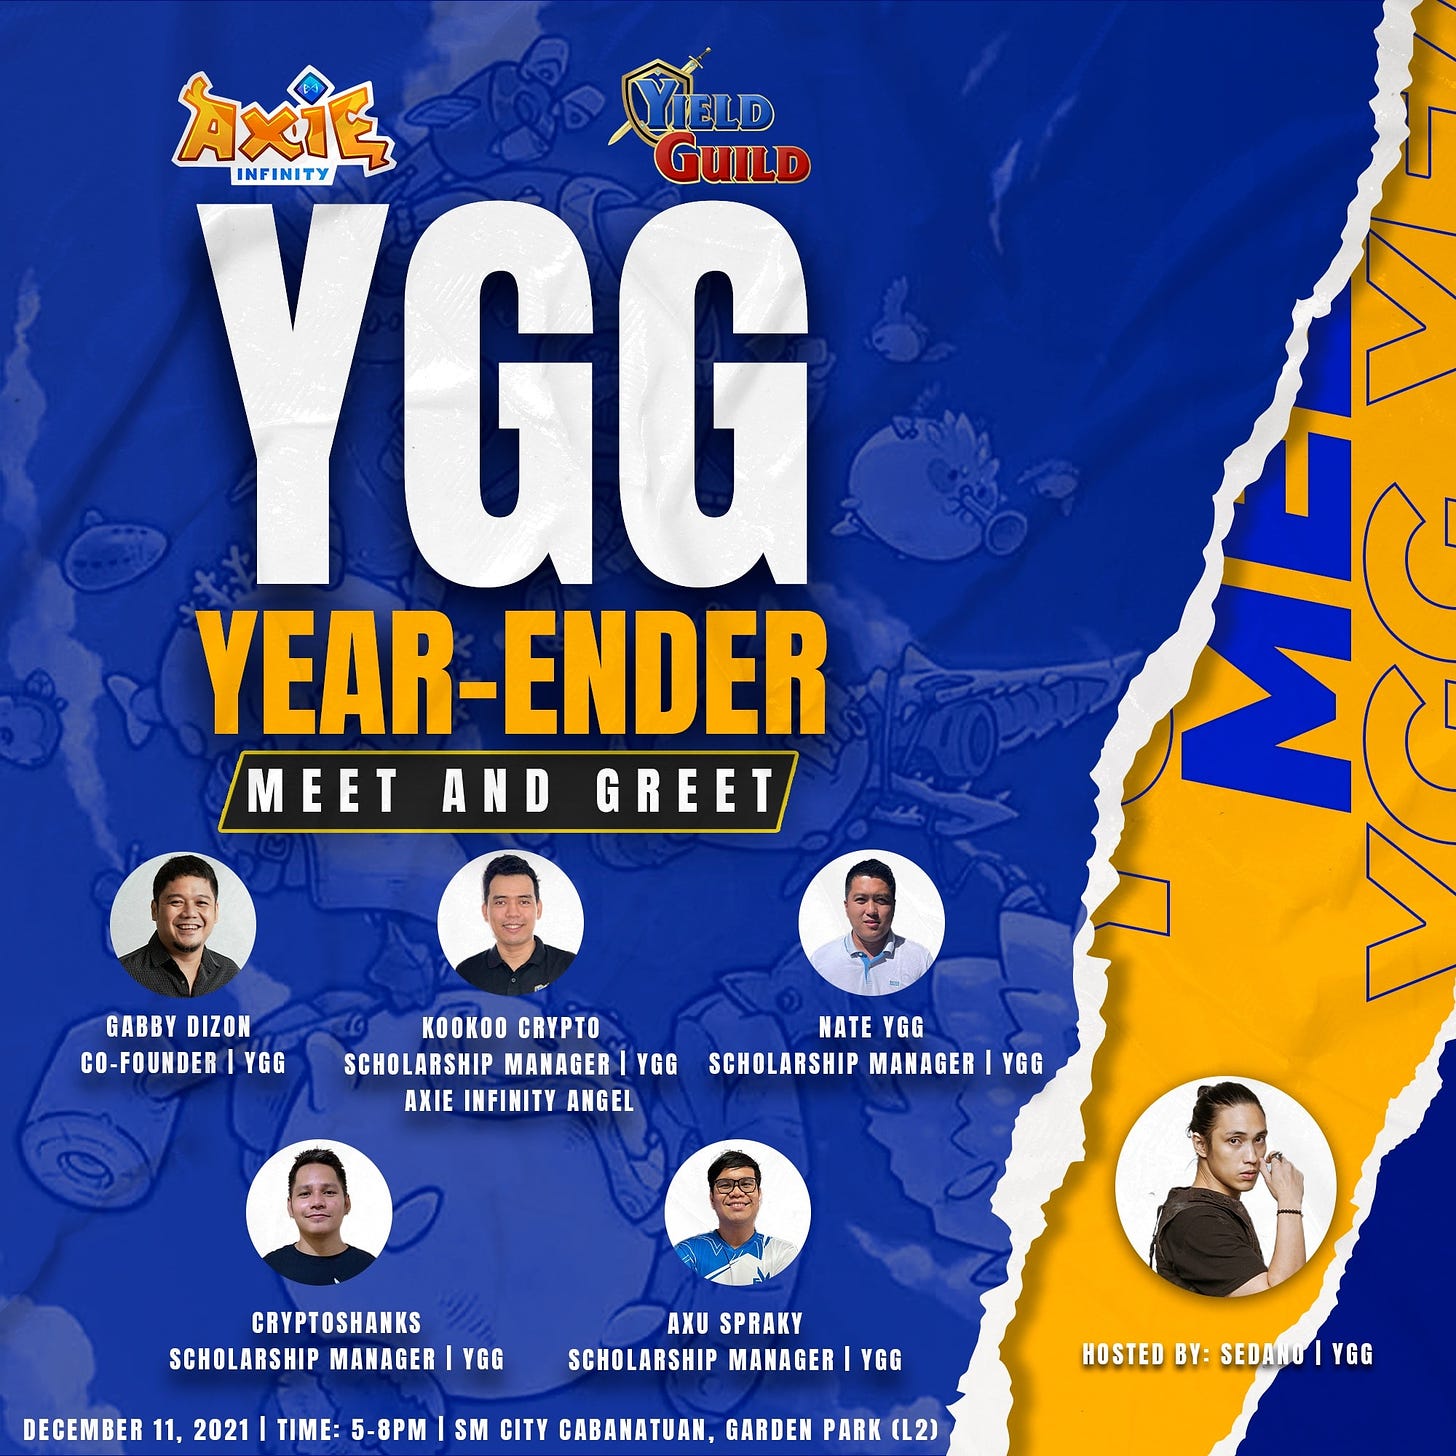 May be an image of 6 people and text that says 'AXIĘ YIELD GUILD YGG INFINITY YEAR-ENDER YEAR MEET AND GREET GABBY DIZON CO-FOUNDER YGG KOOKOO CRYPTO NATE YGG SCHOLARSHIP MANAGER YGG SCHOLARSHIP MANAGER YGG AXIE INFINITY ANGEL CRYPTOSHANKS SCHOLARSHIP MANAGER YGG DECEMBER 11, 2021| TIME: AXU SPRAKY SCHOLARSHIP MANAGER YGG 5-8PM SM CITY CABANATUAN, GARDEN PARK (L2) HOSTED BY: SEDANO YGG'